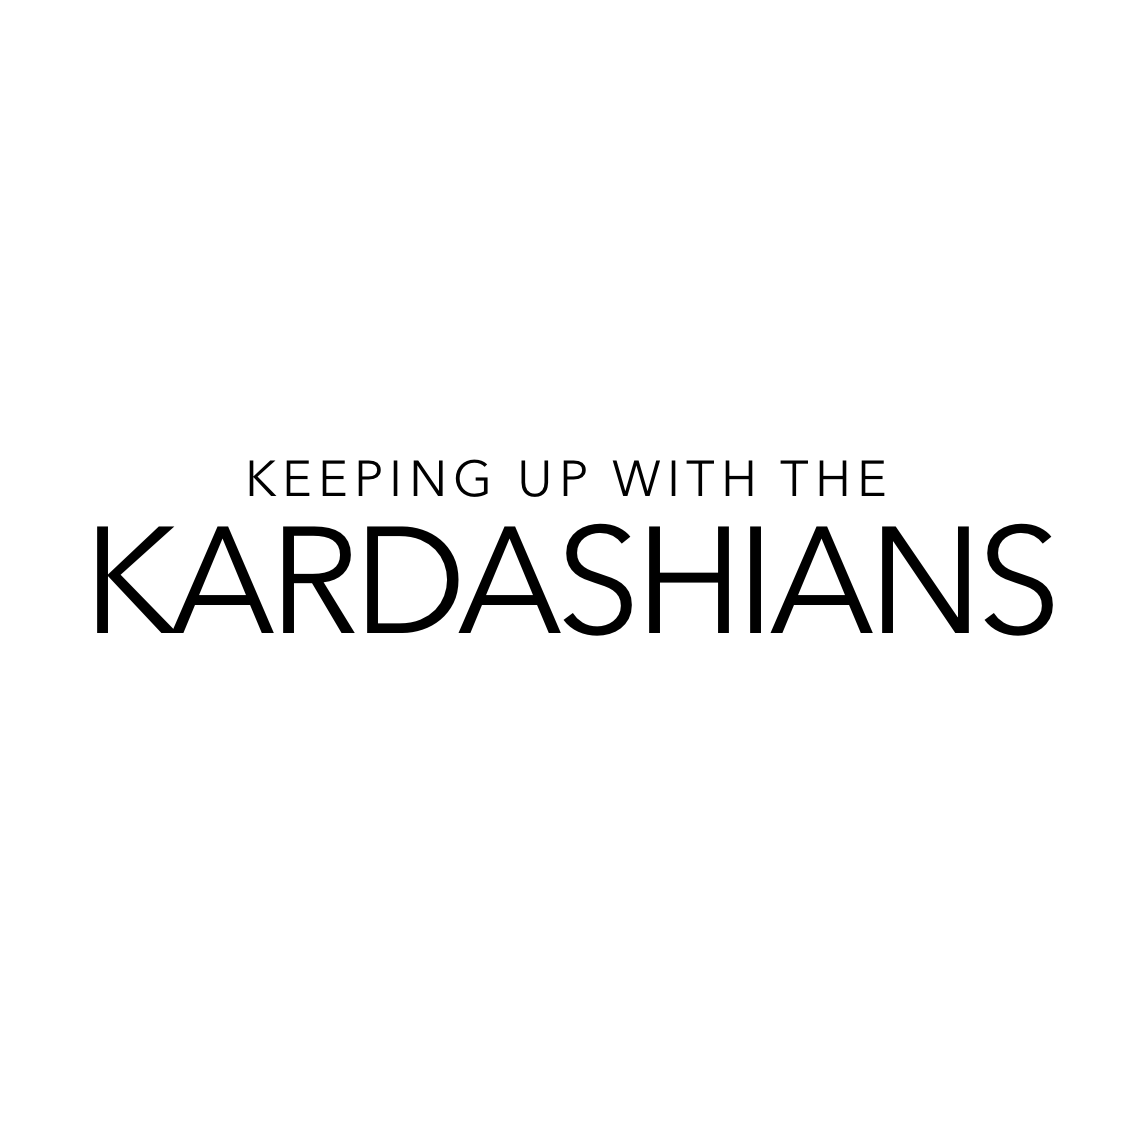 Why is Kanye never on Keeping Up with the Kardashians?